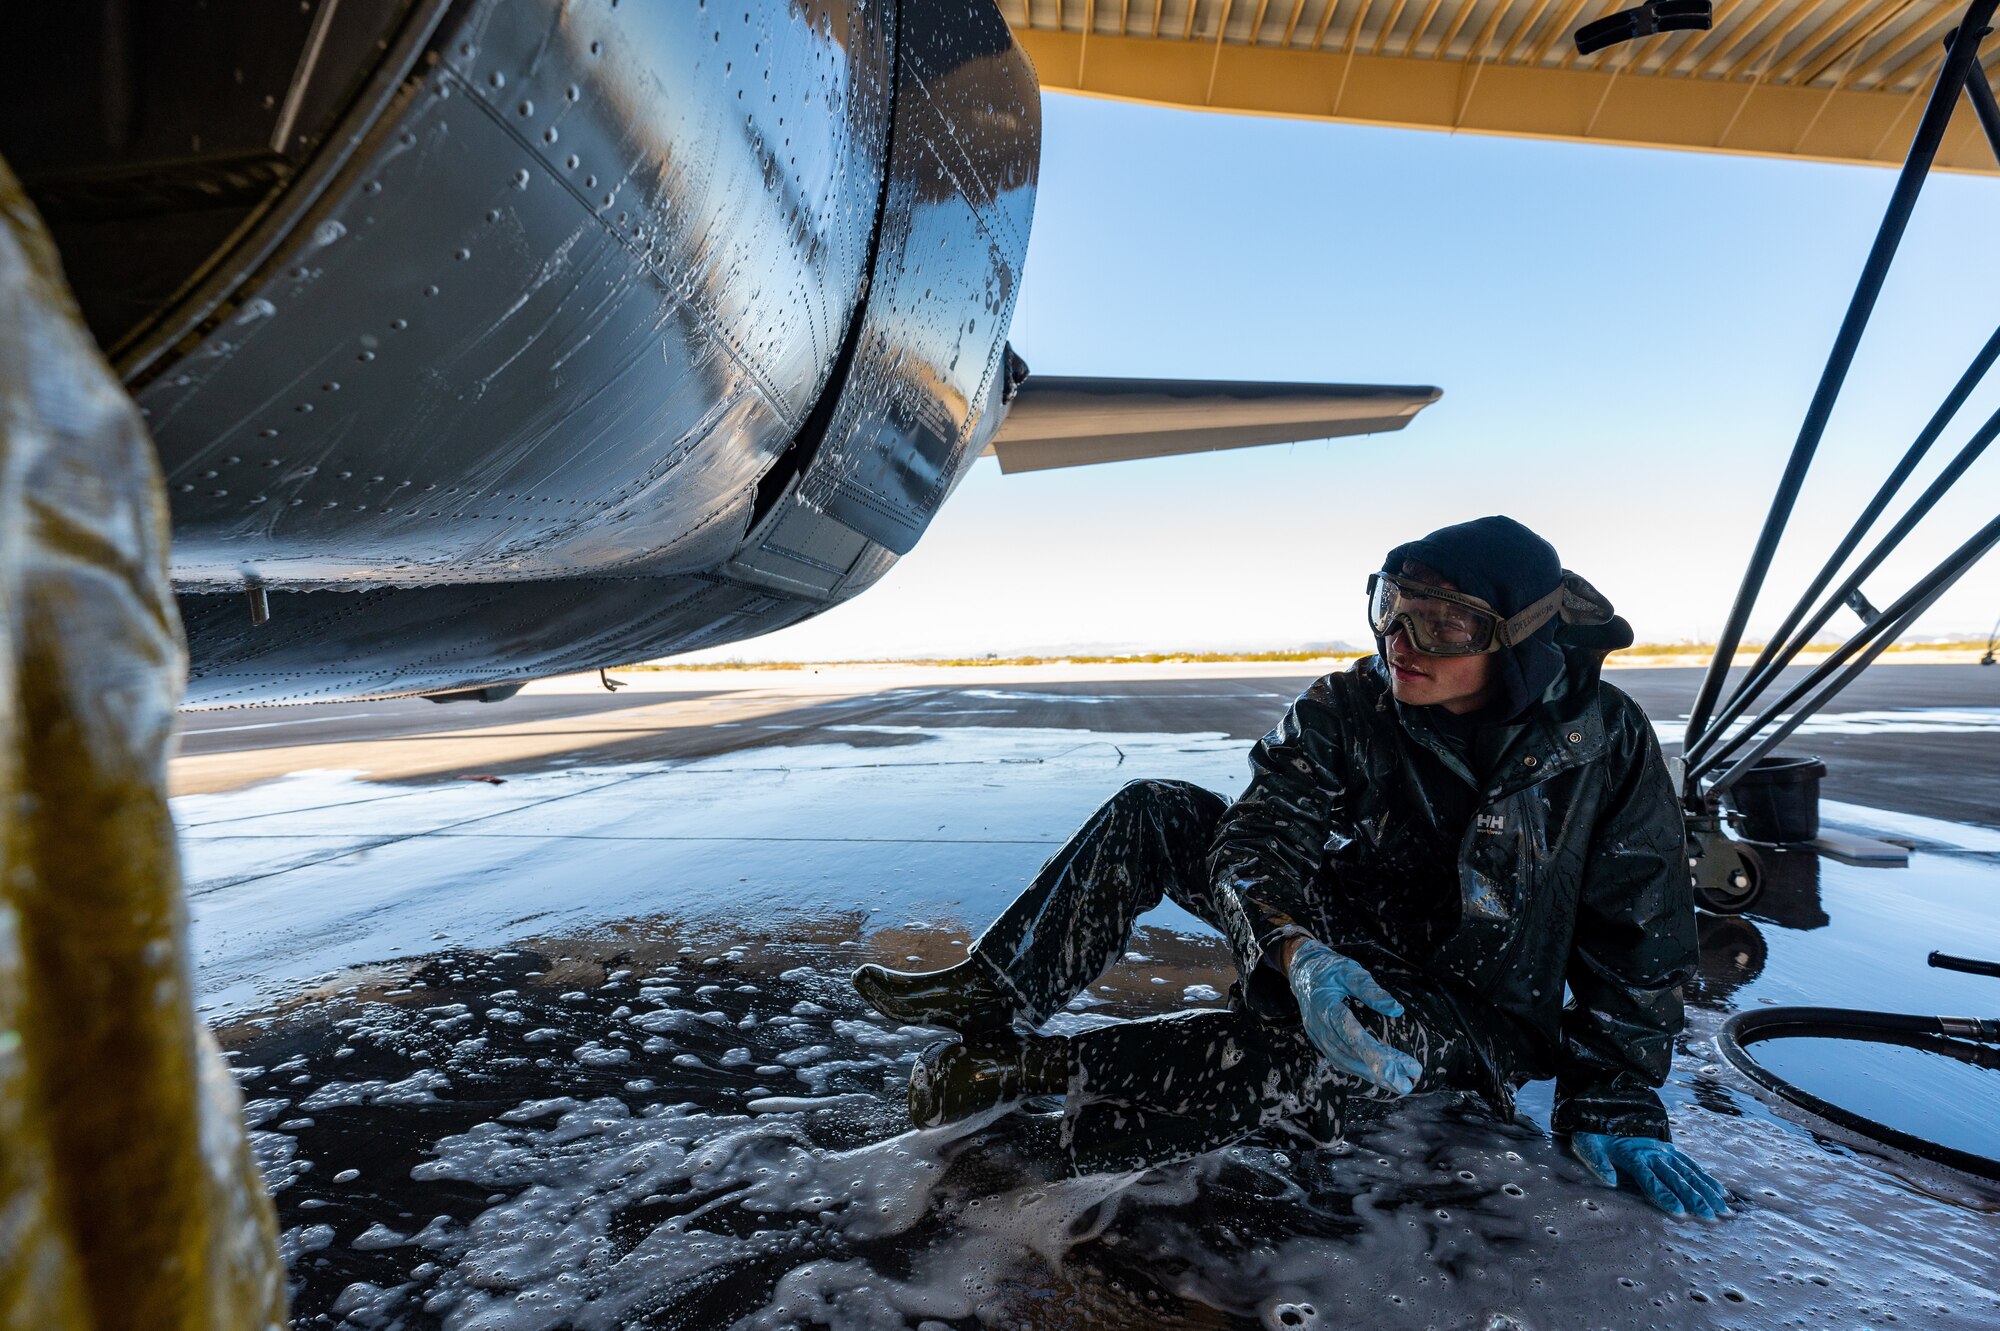 photo of a service member donning personal protective equipment washing underneath a large military aircraft